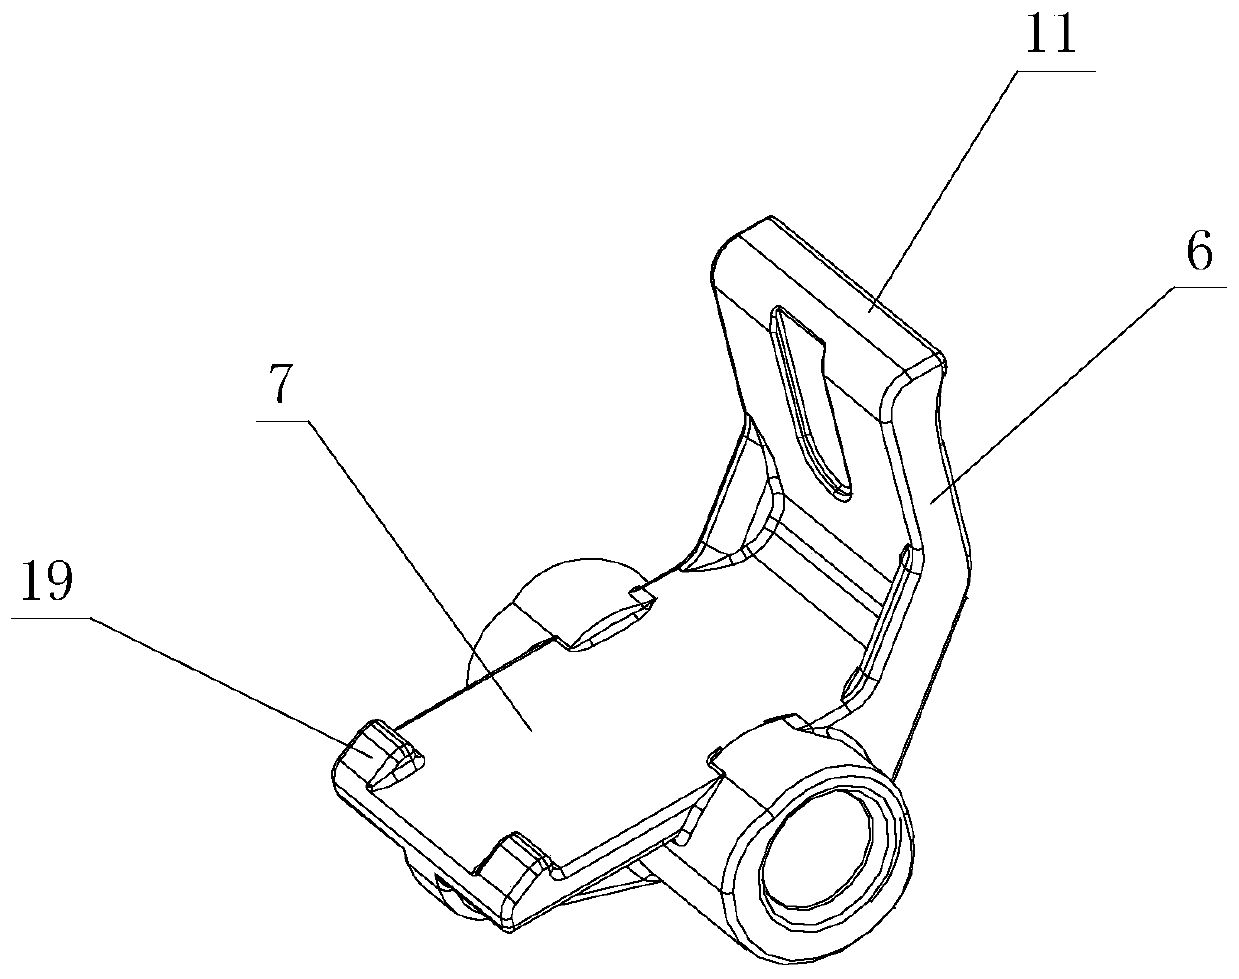 Integrated optimized damping structure of furniture hinge